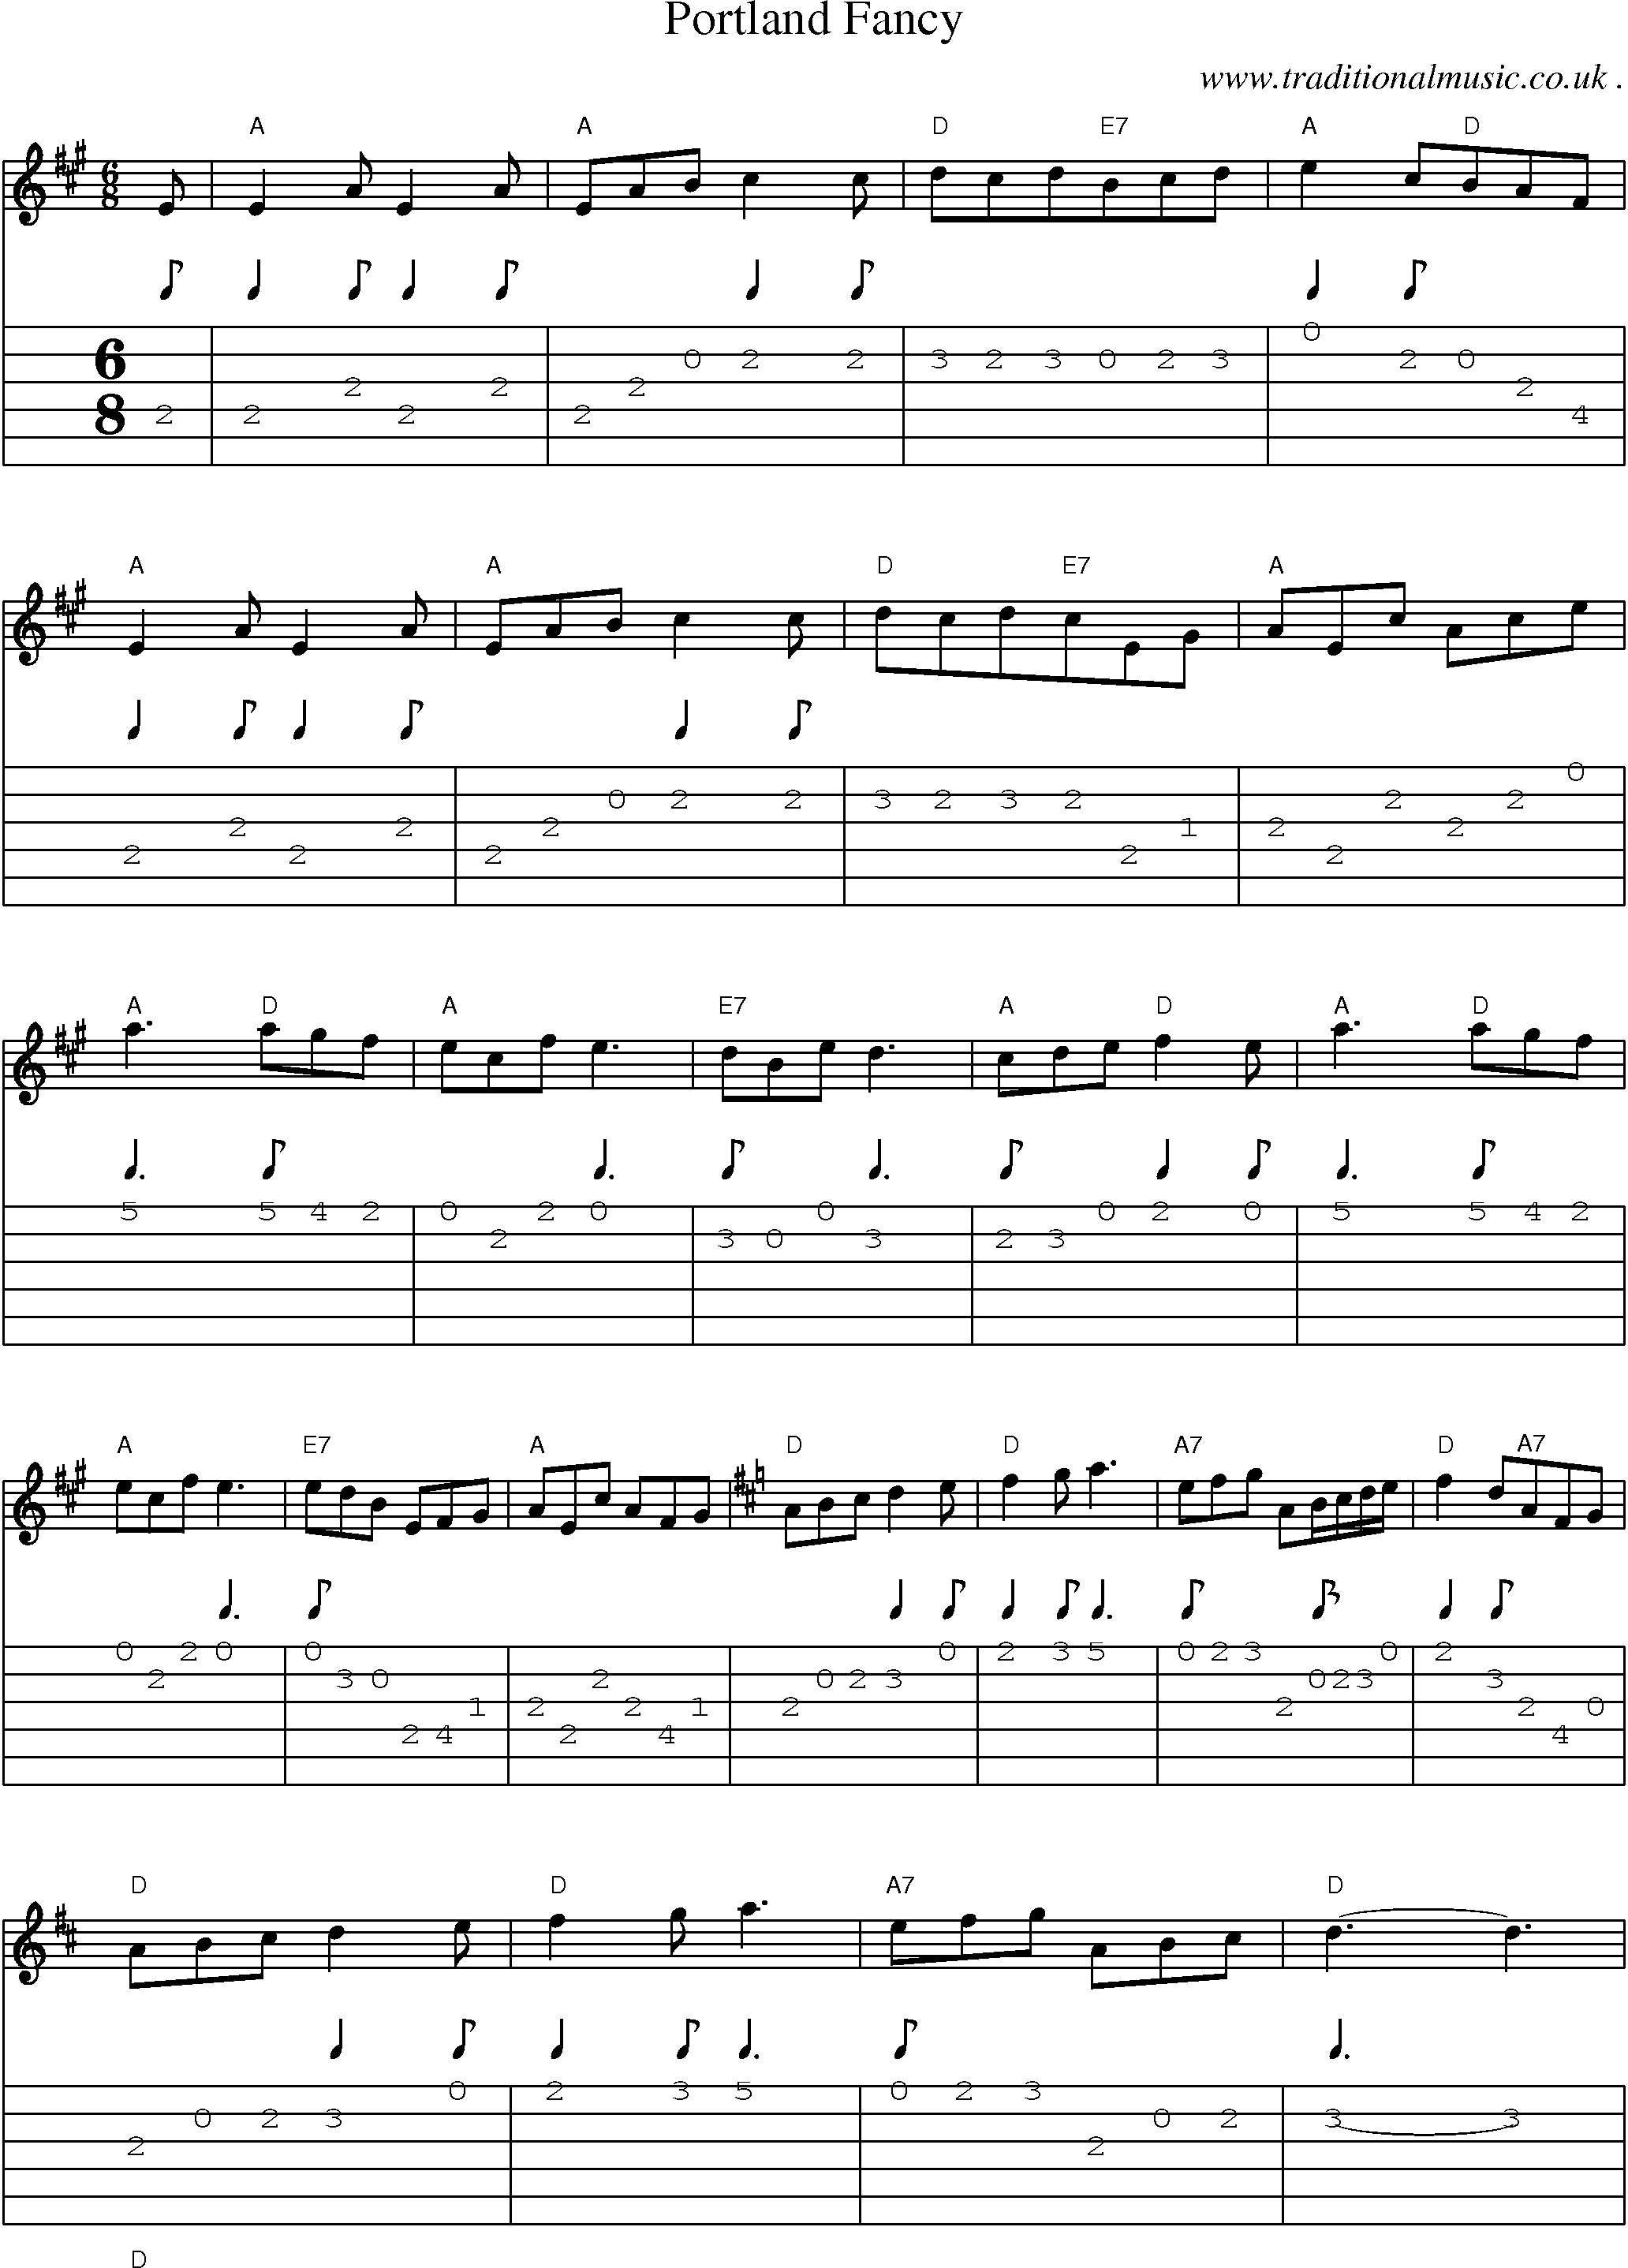 Sheet-Music and Guitar Tabs for Portland Fancy